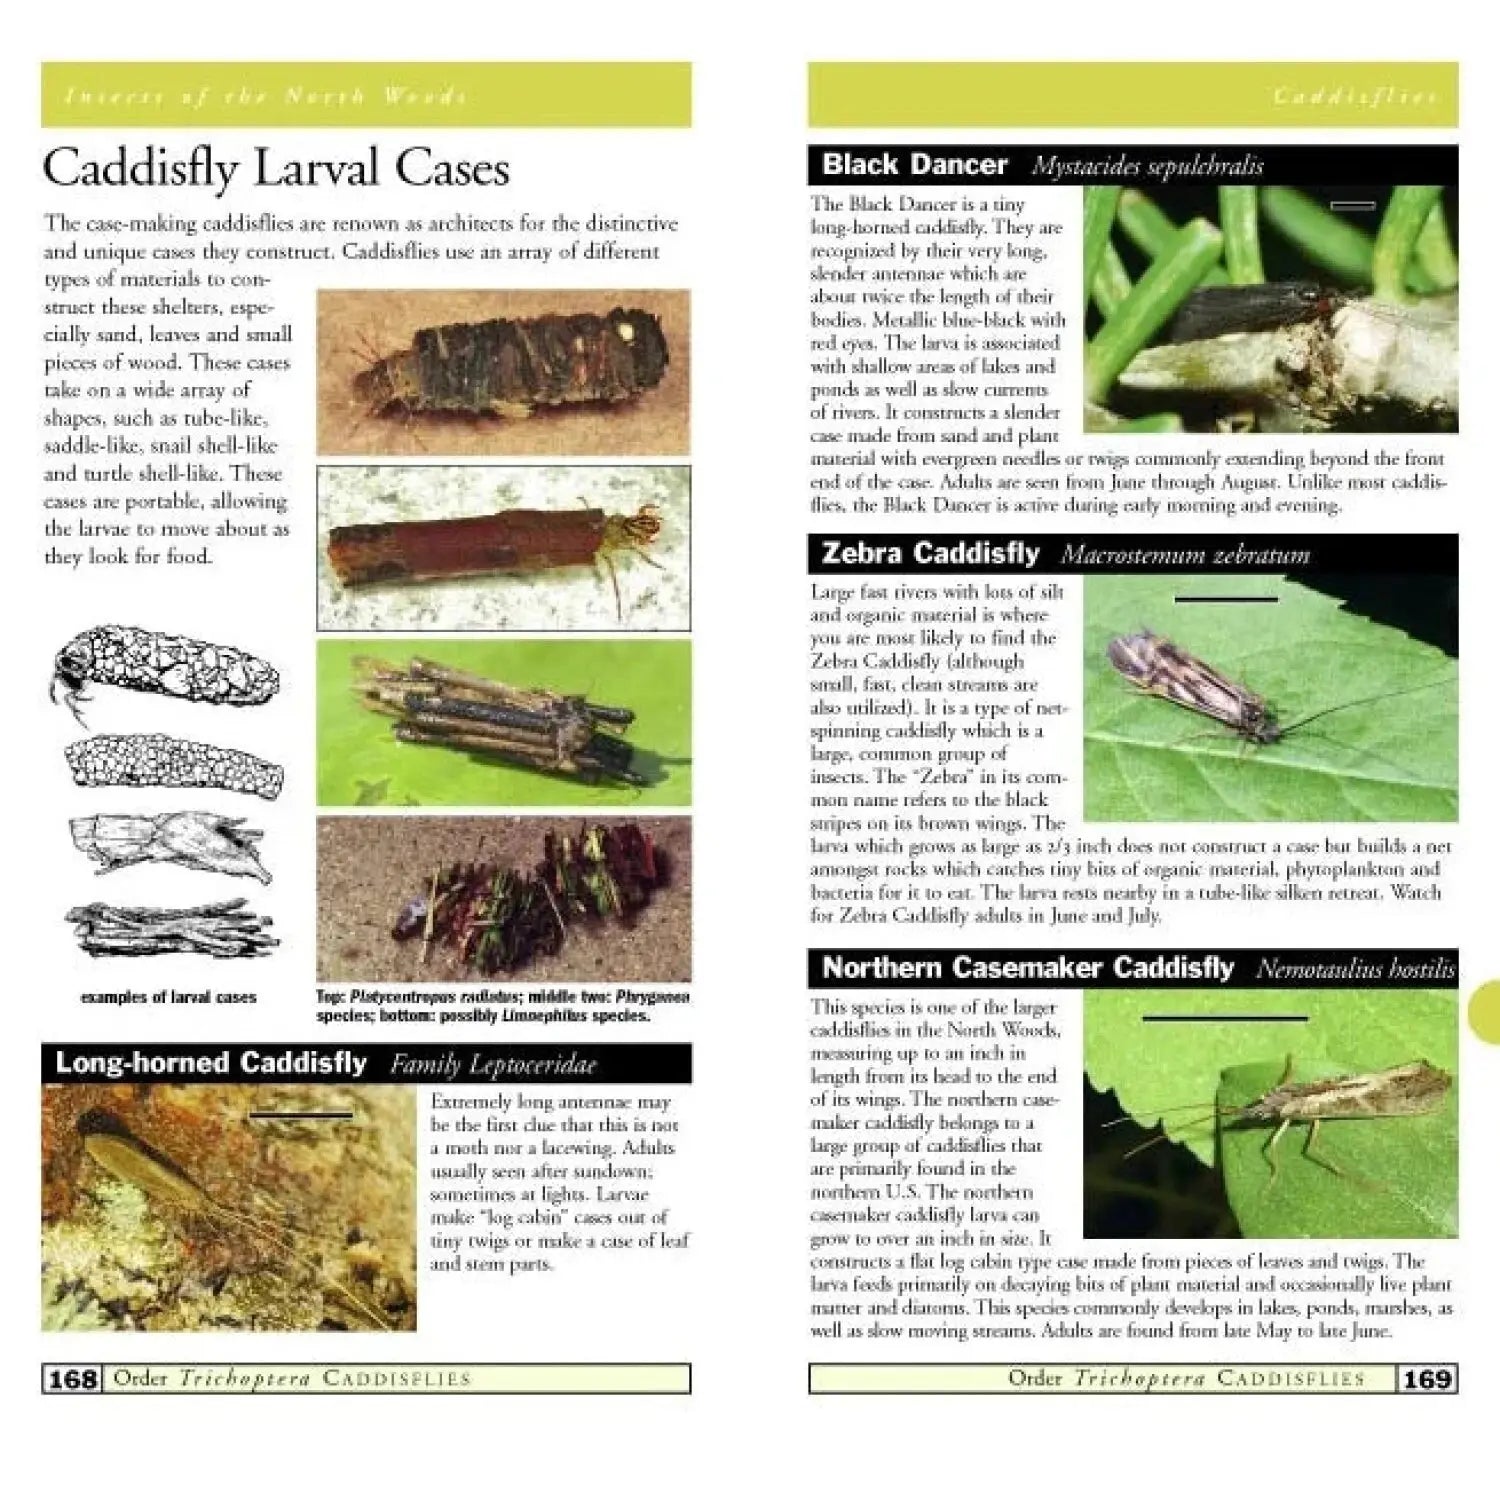 Insects of the North Woods Guide Book